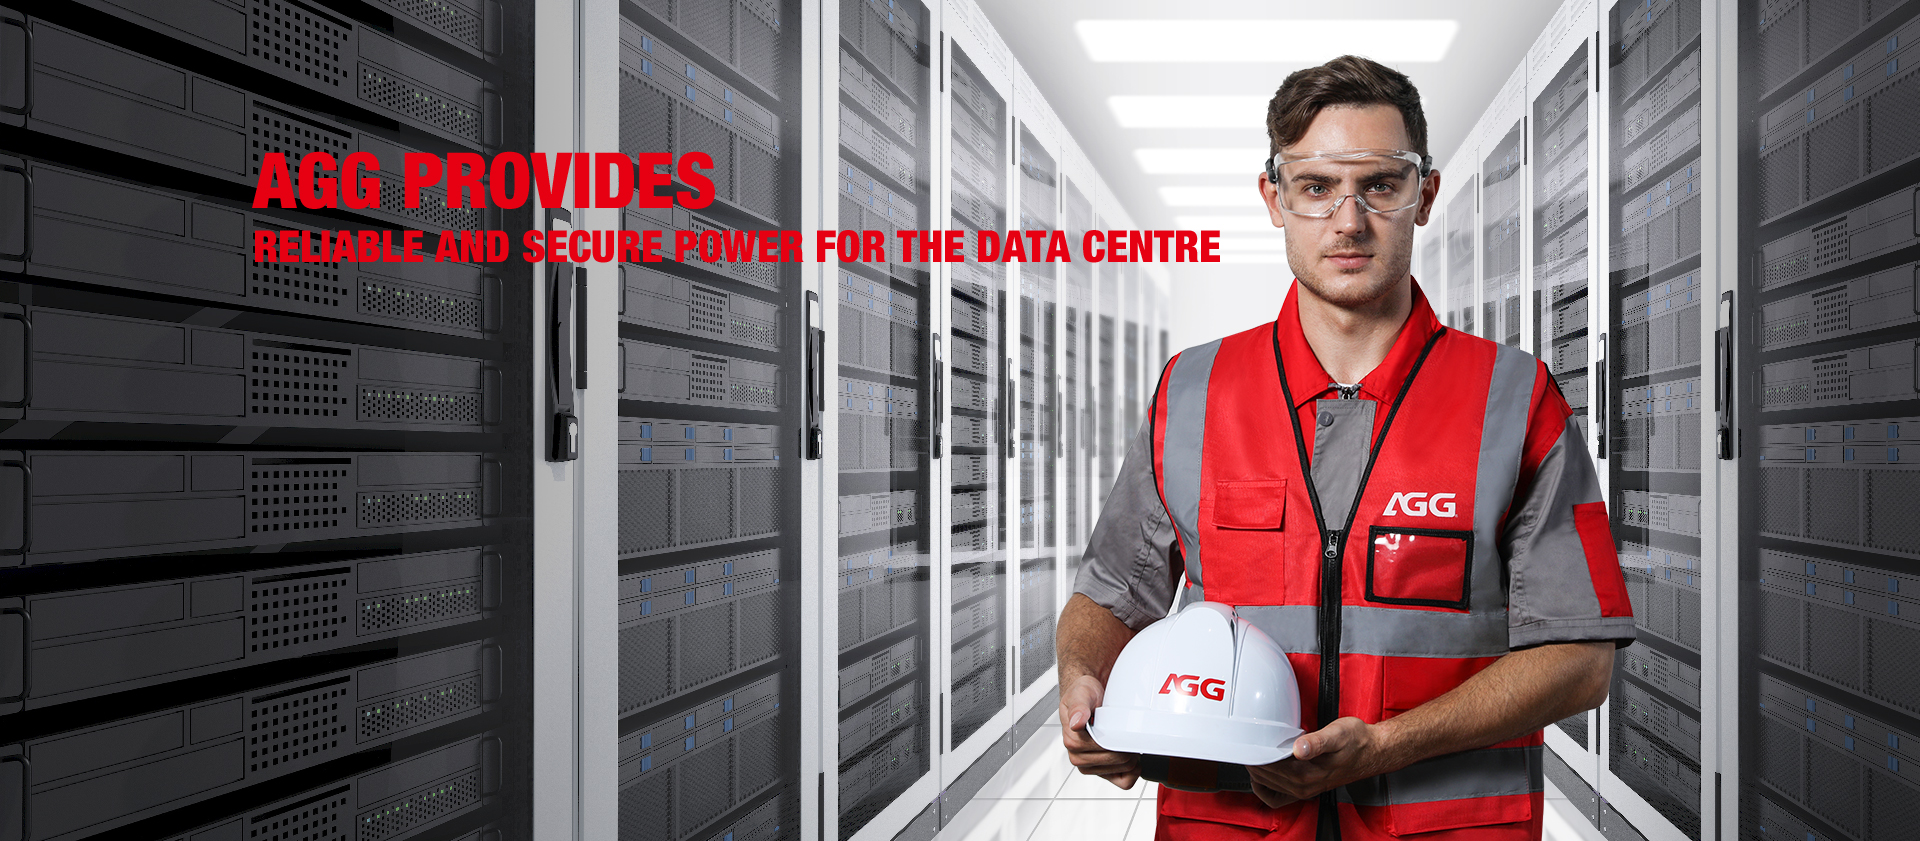 AGG Provides Reliable and Secure Power for the Data Center